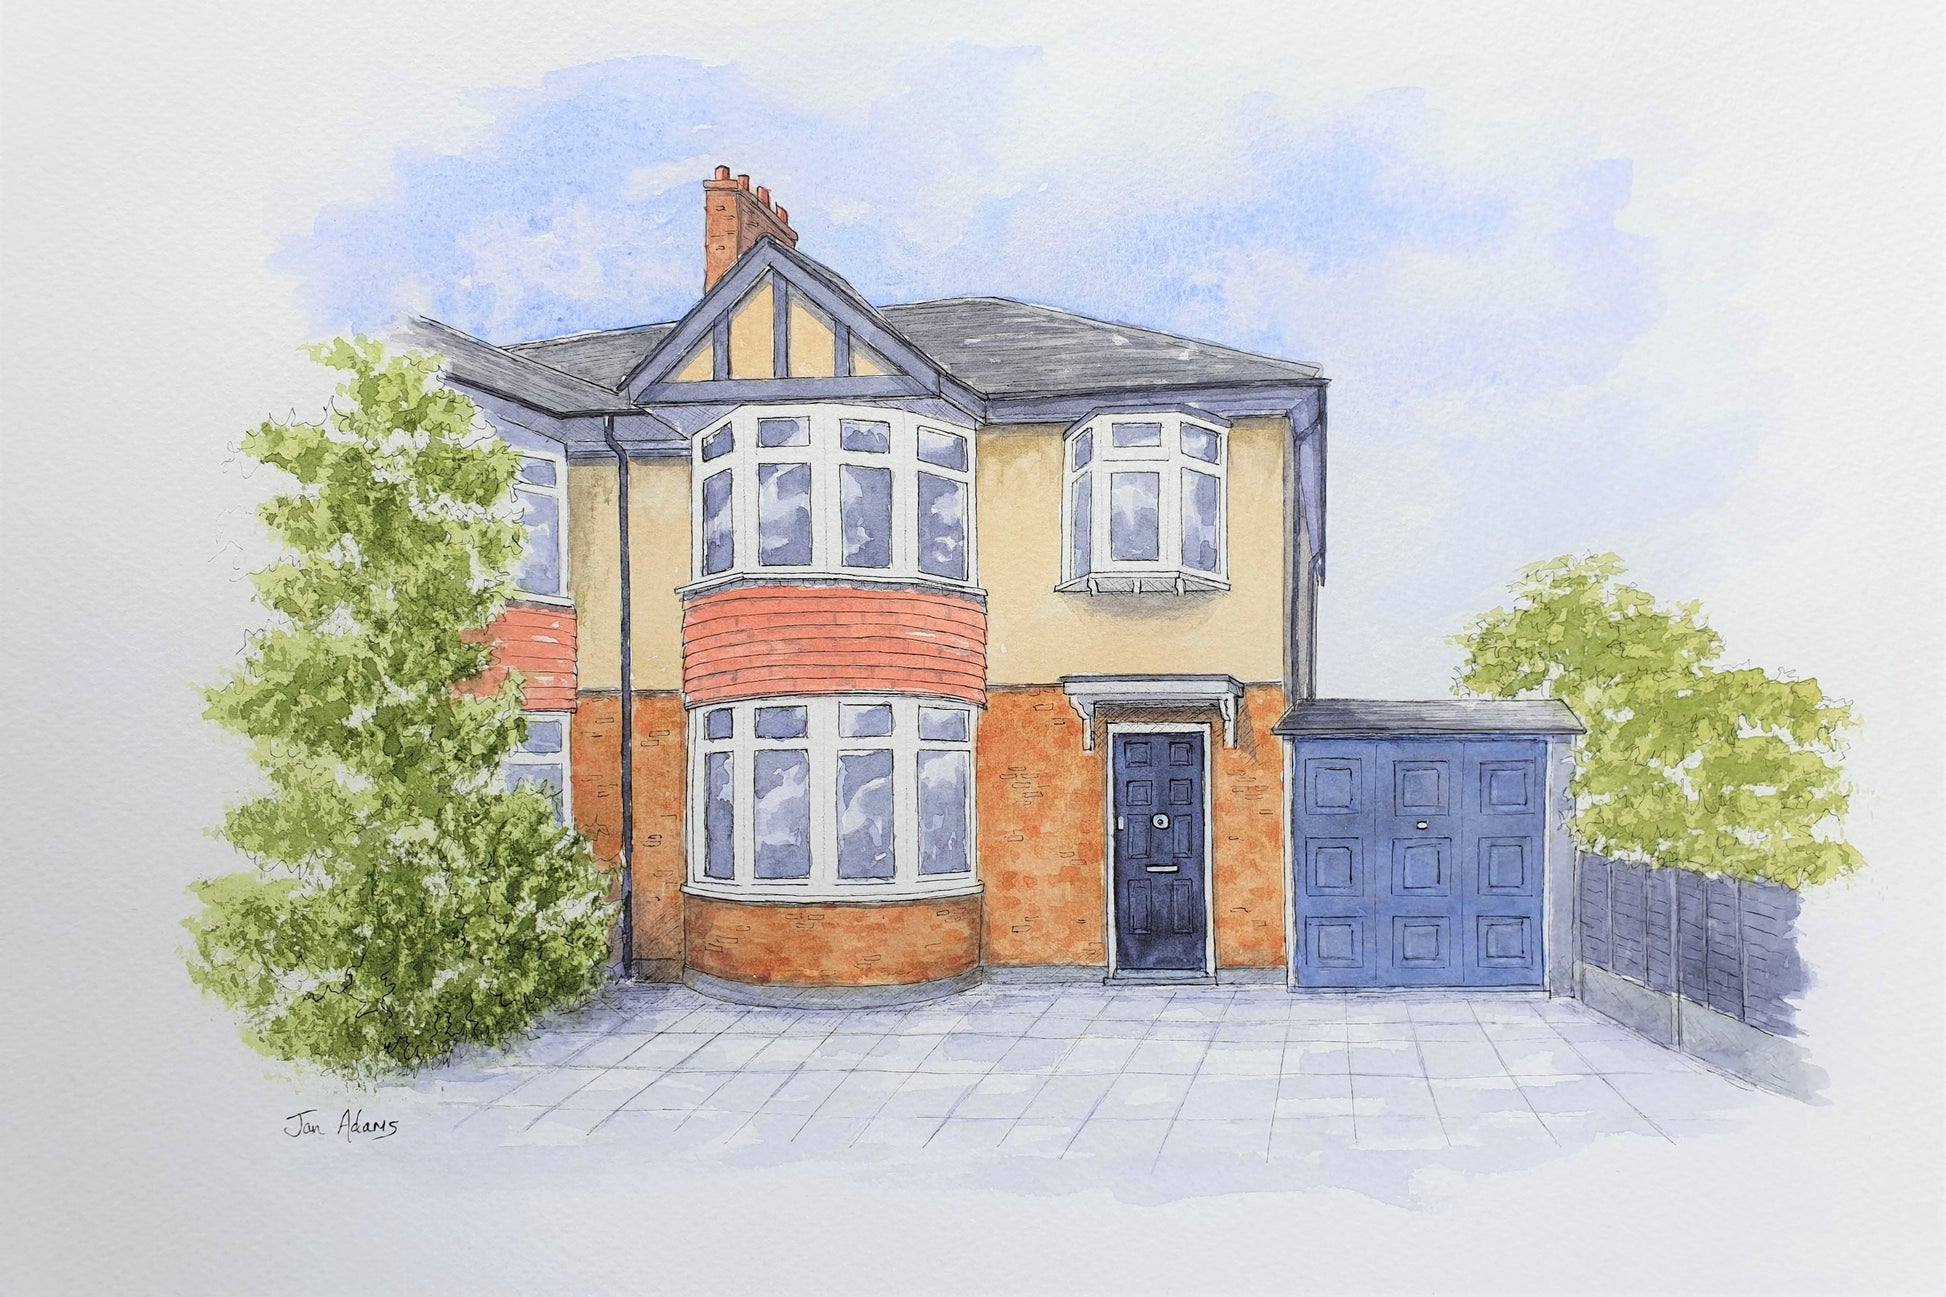 Semi detached house in ink and watercolour